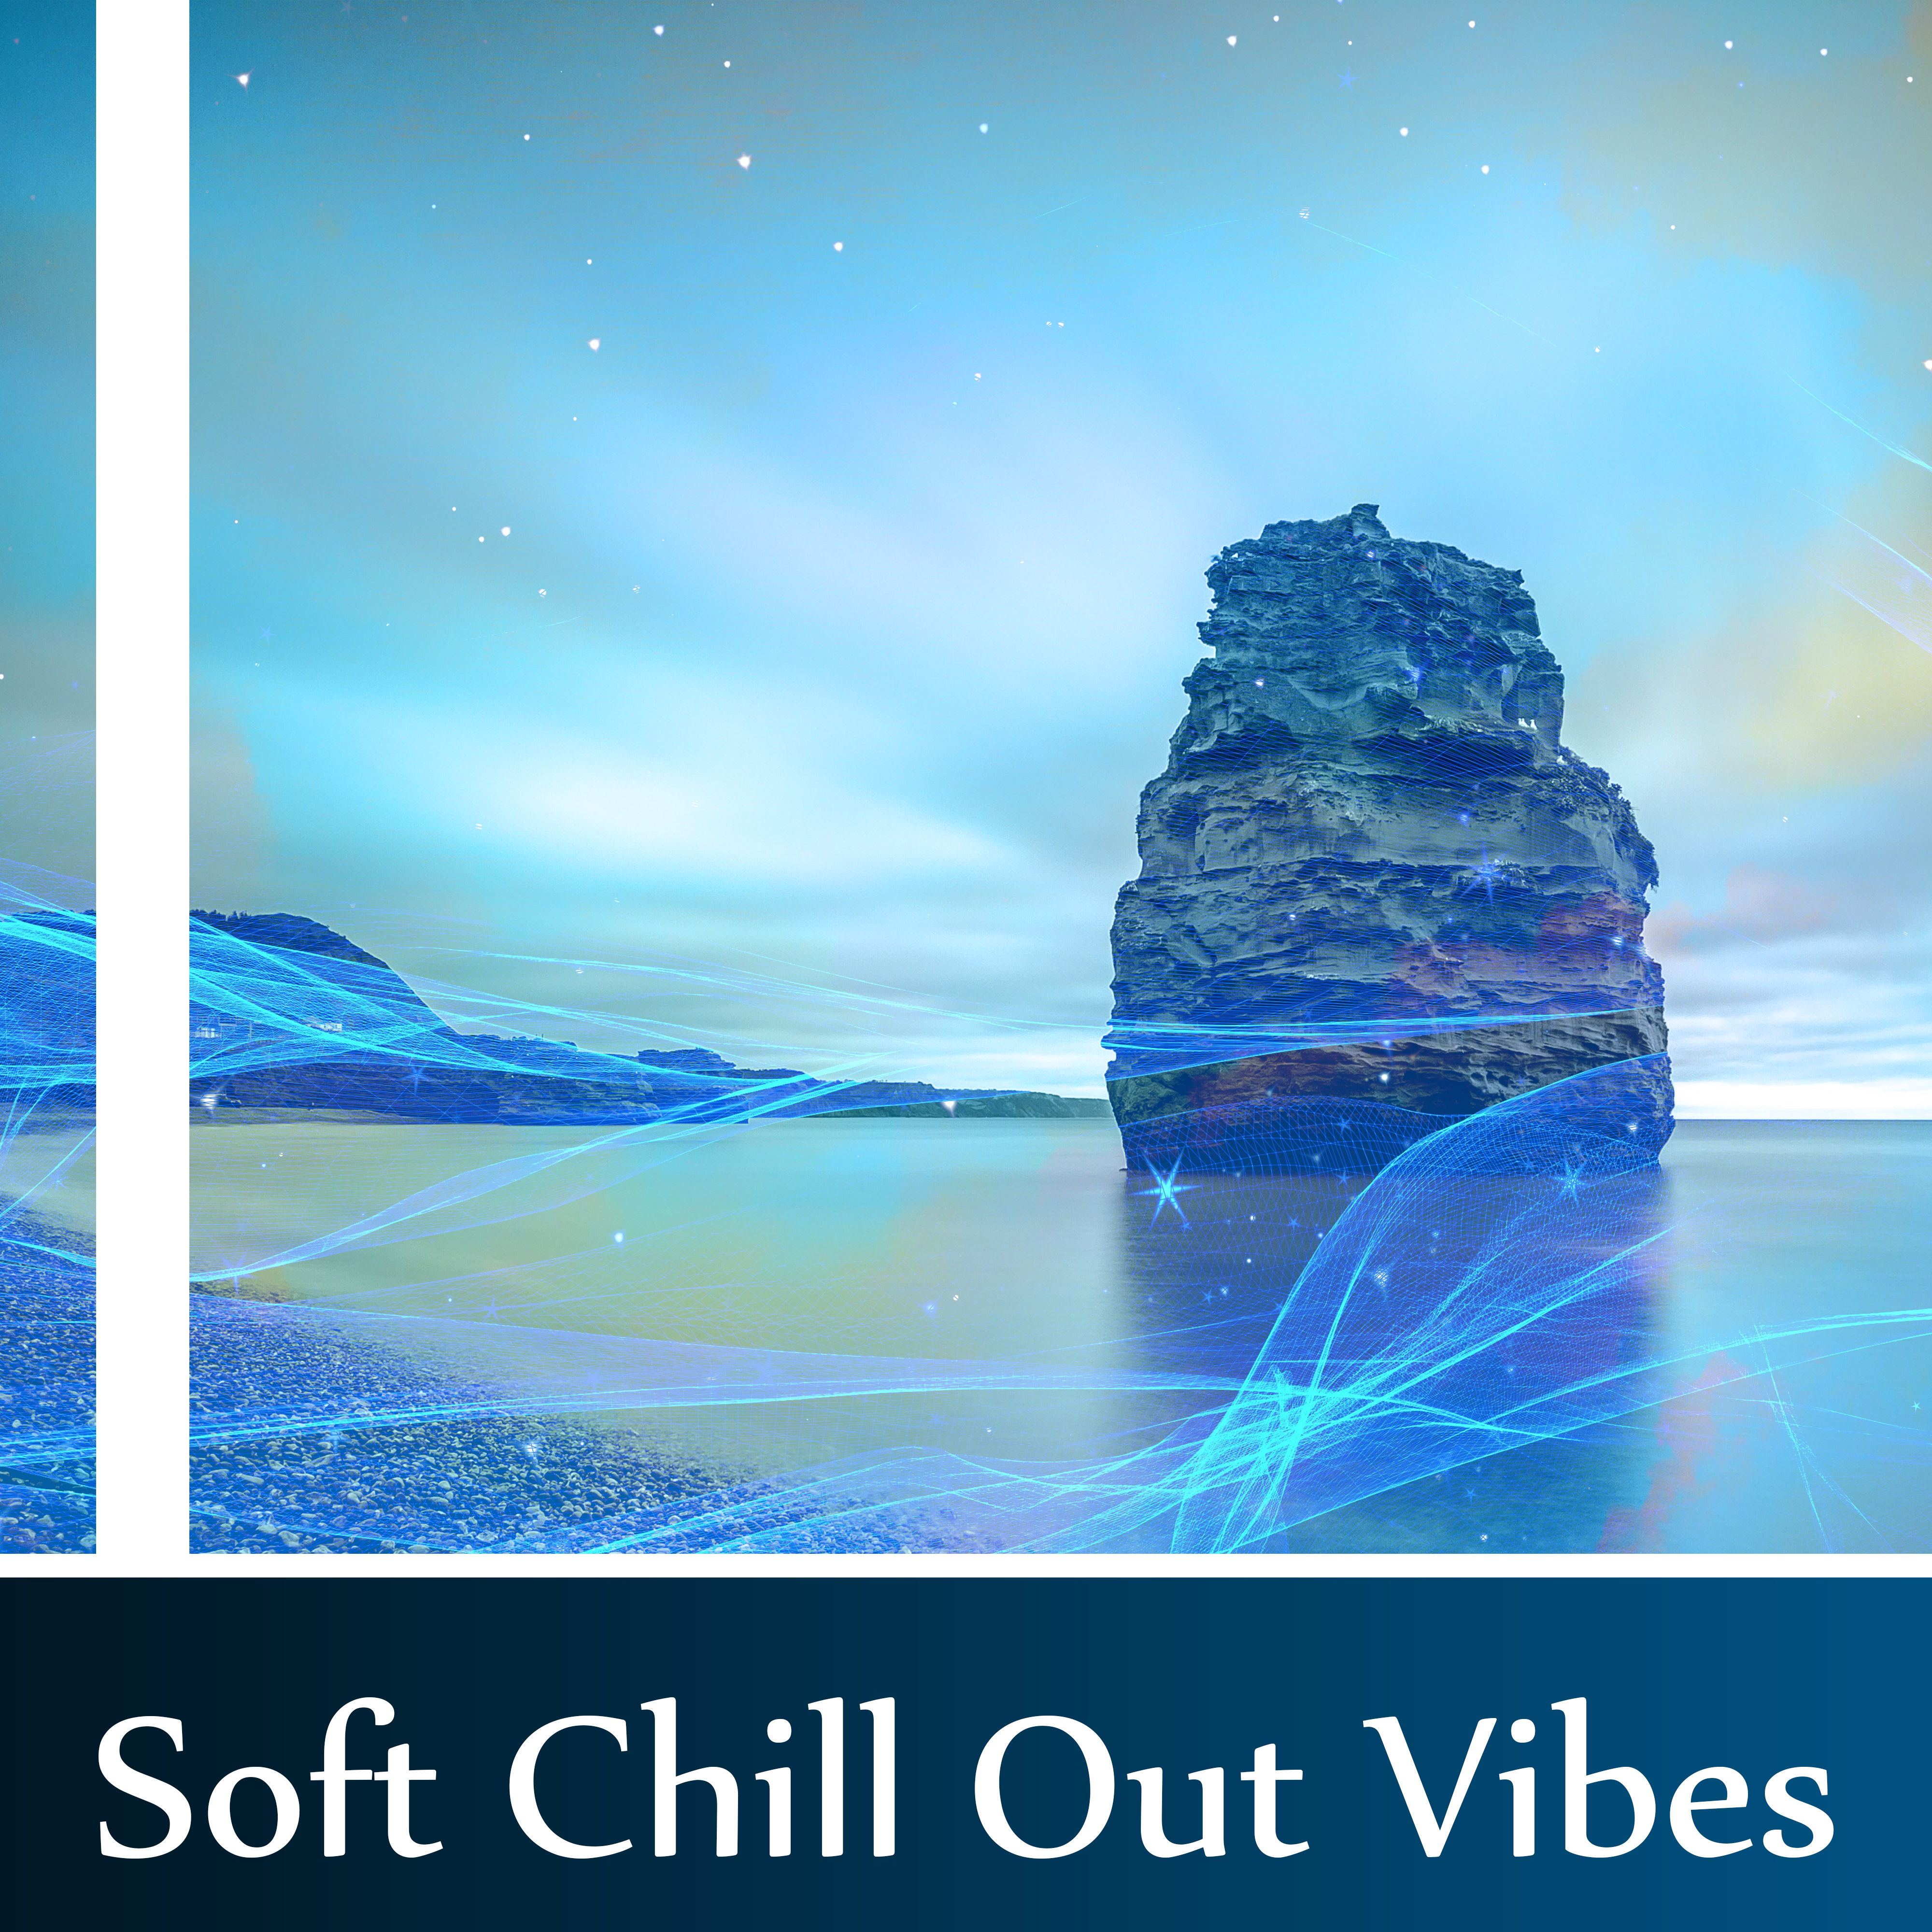 Soft Chill Out Vibes – Relaxing Summer, Holiday on Tropical Island, Sunbath,  Easy Listening